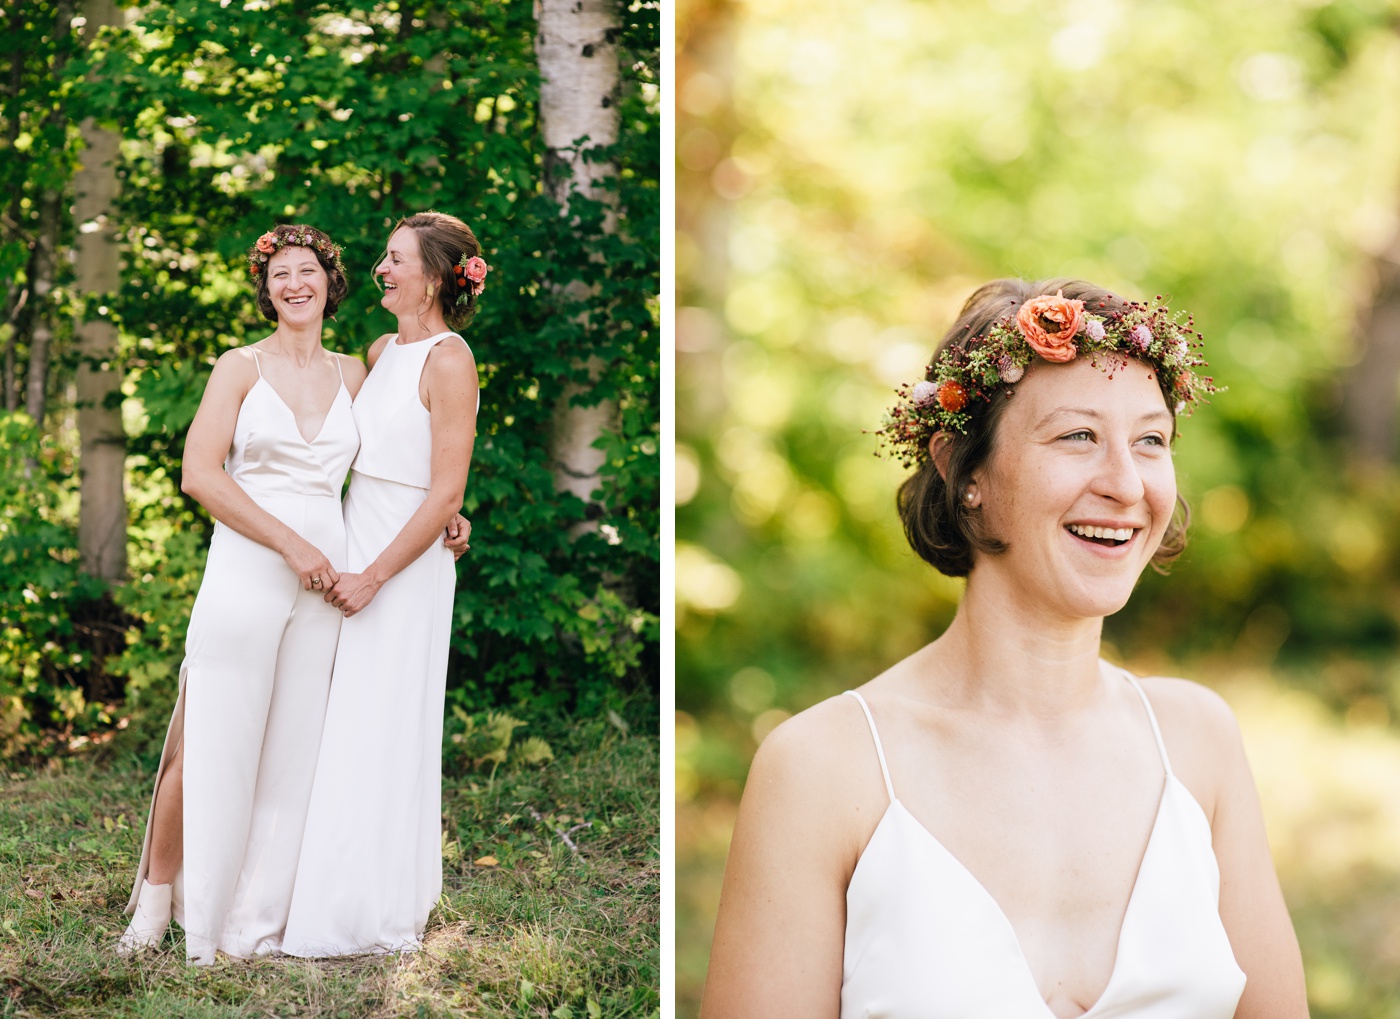 Bridal portraits on a private estate in the White Mountains